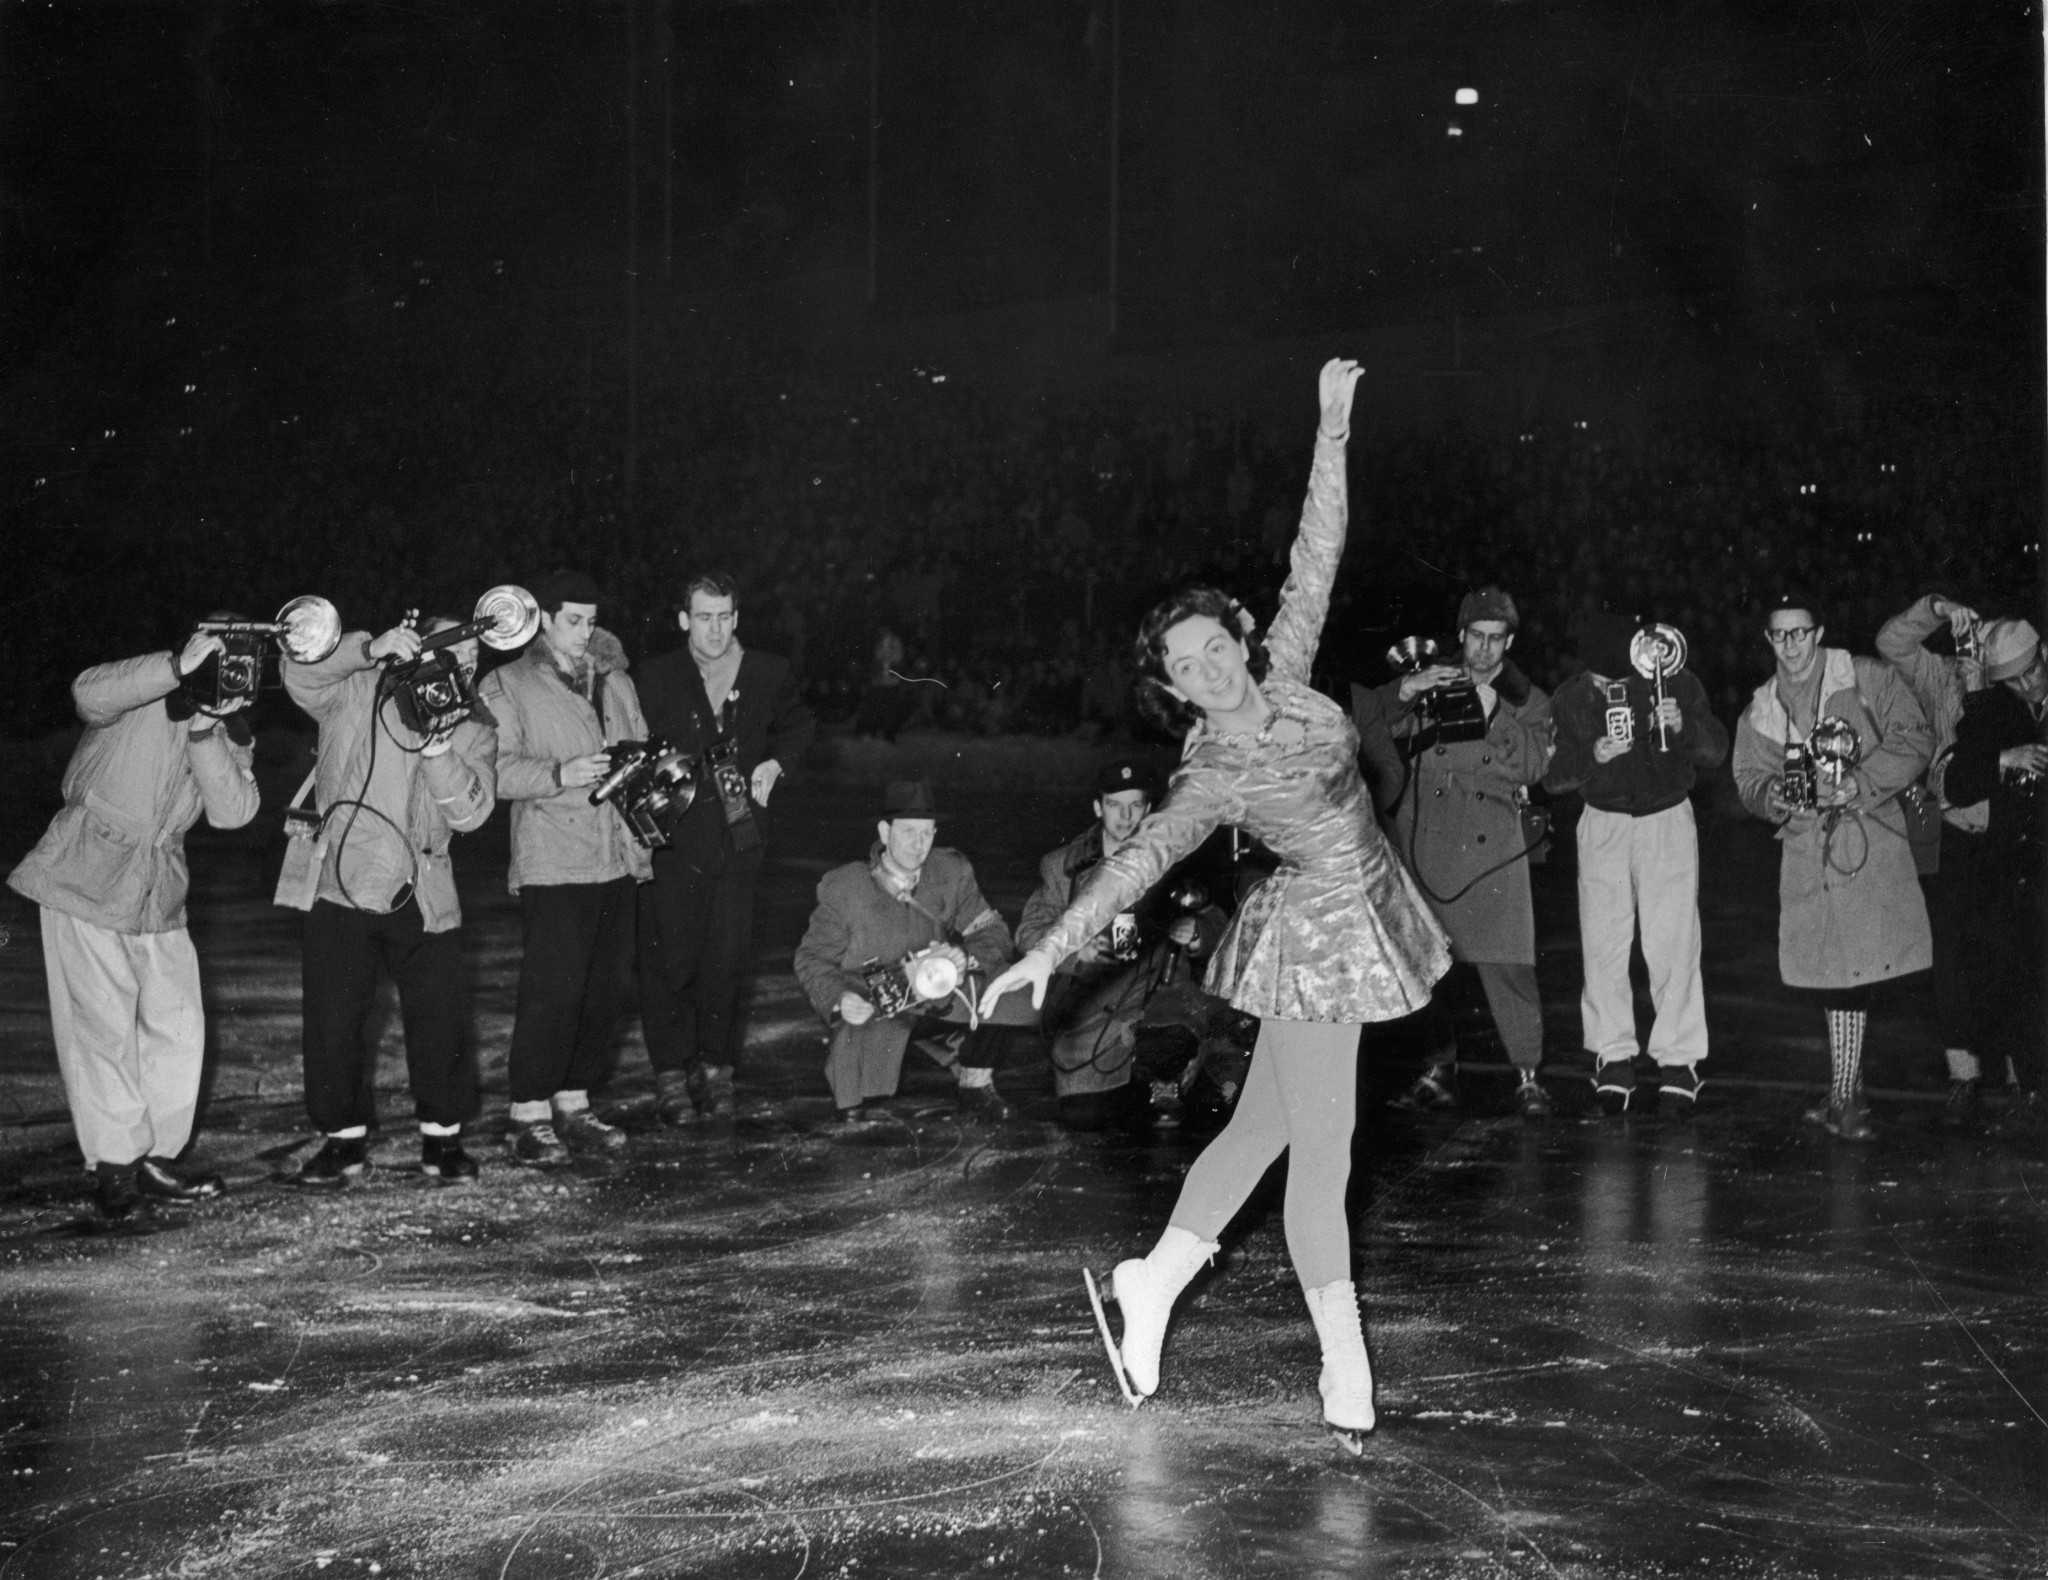 Briton Jeannette Altwegg has won two Olympic medals during her career, one bronze in St Moritz in 1948 and gold in Oslo in 1952 Â© Getty Images